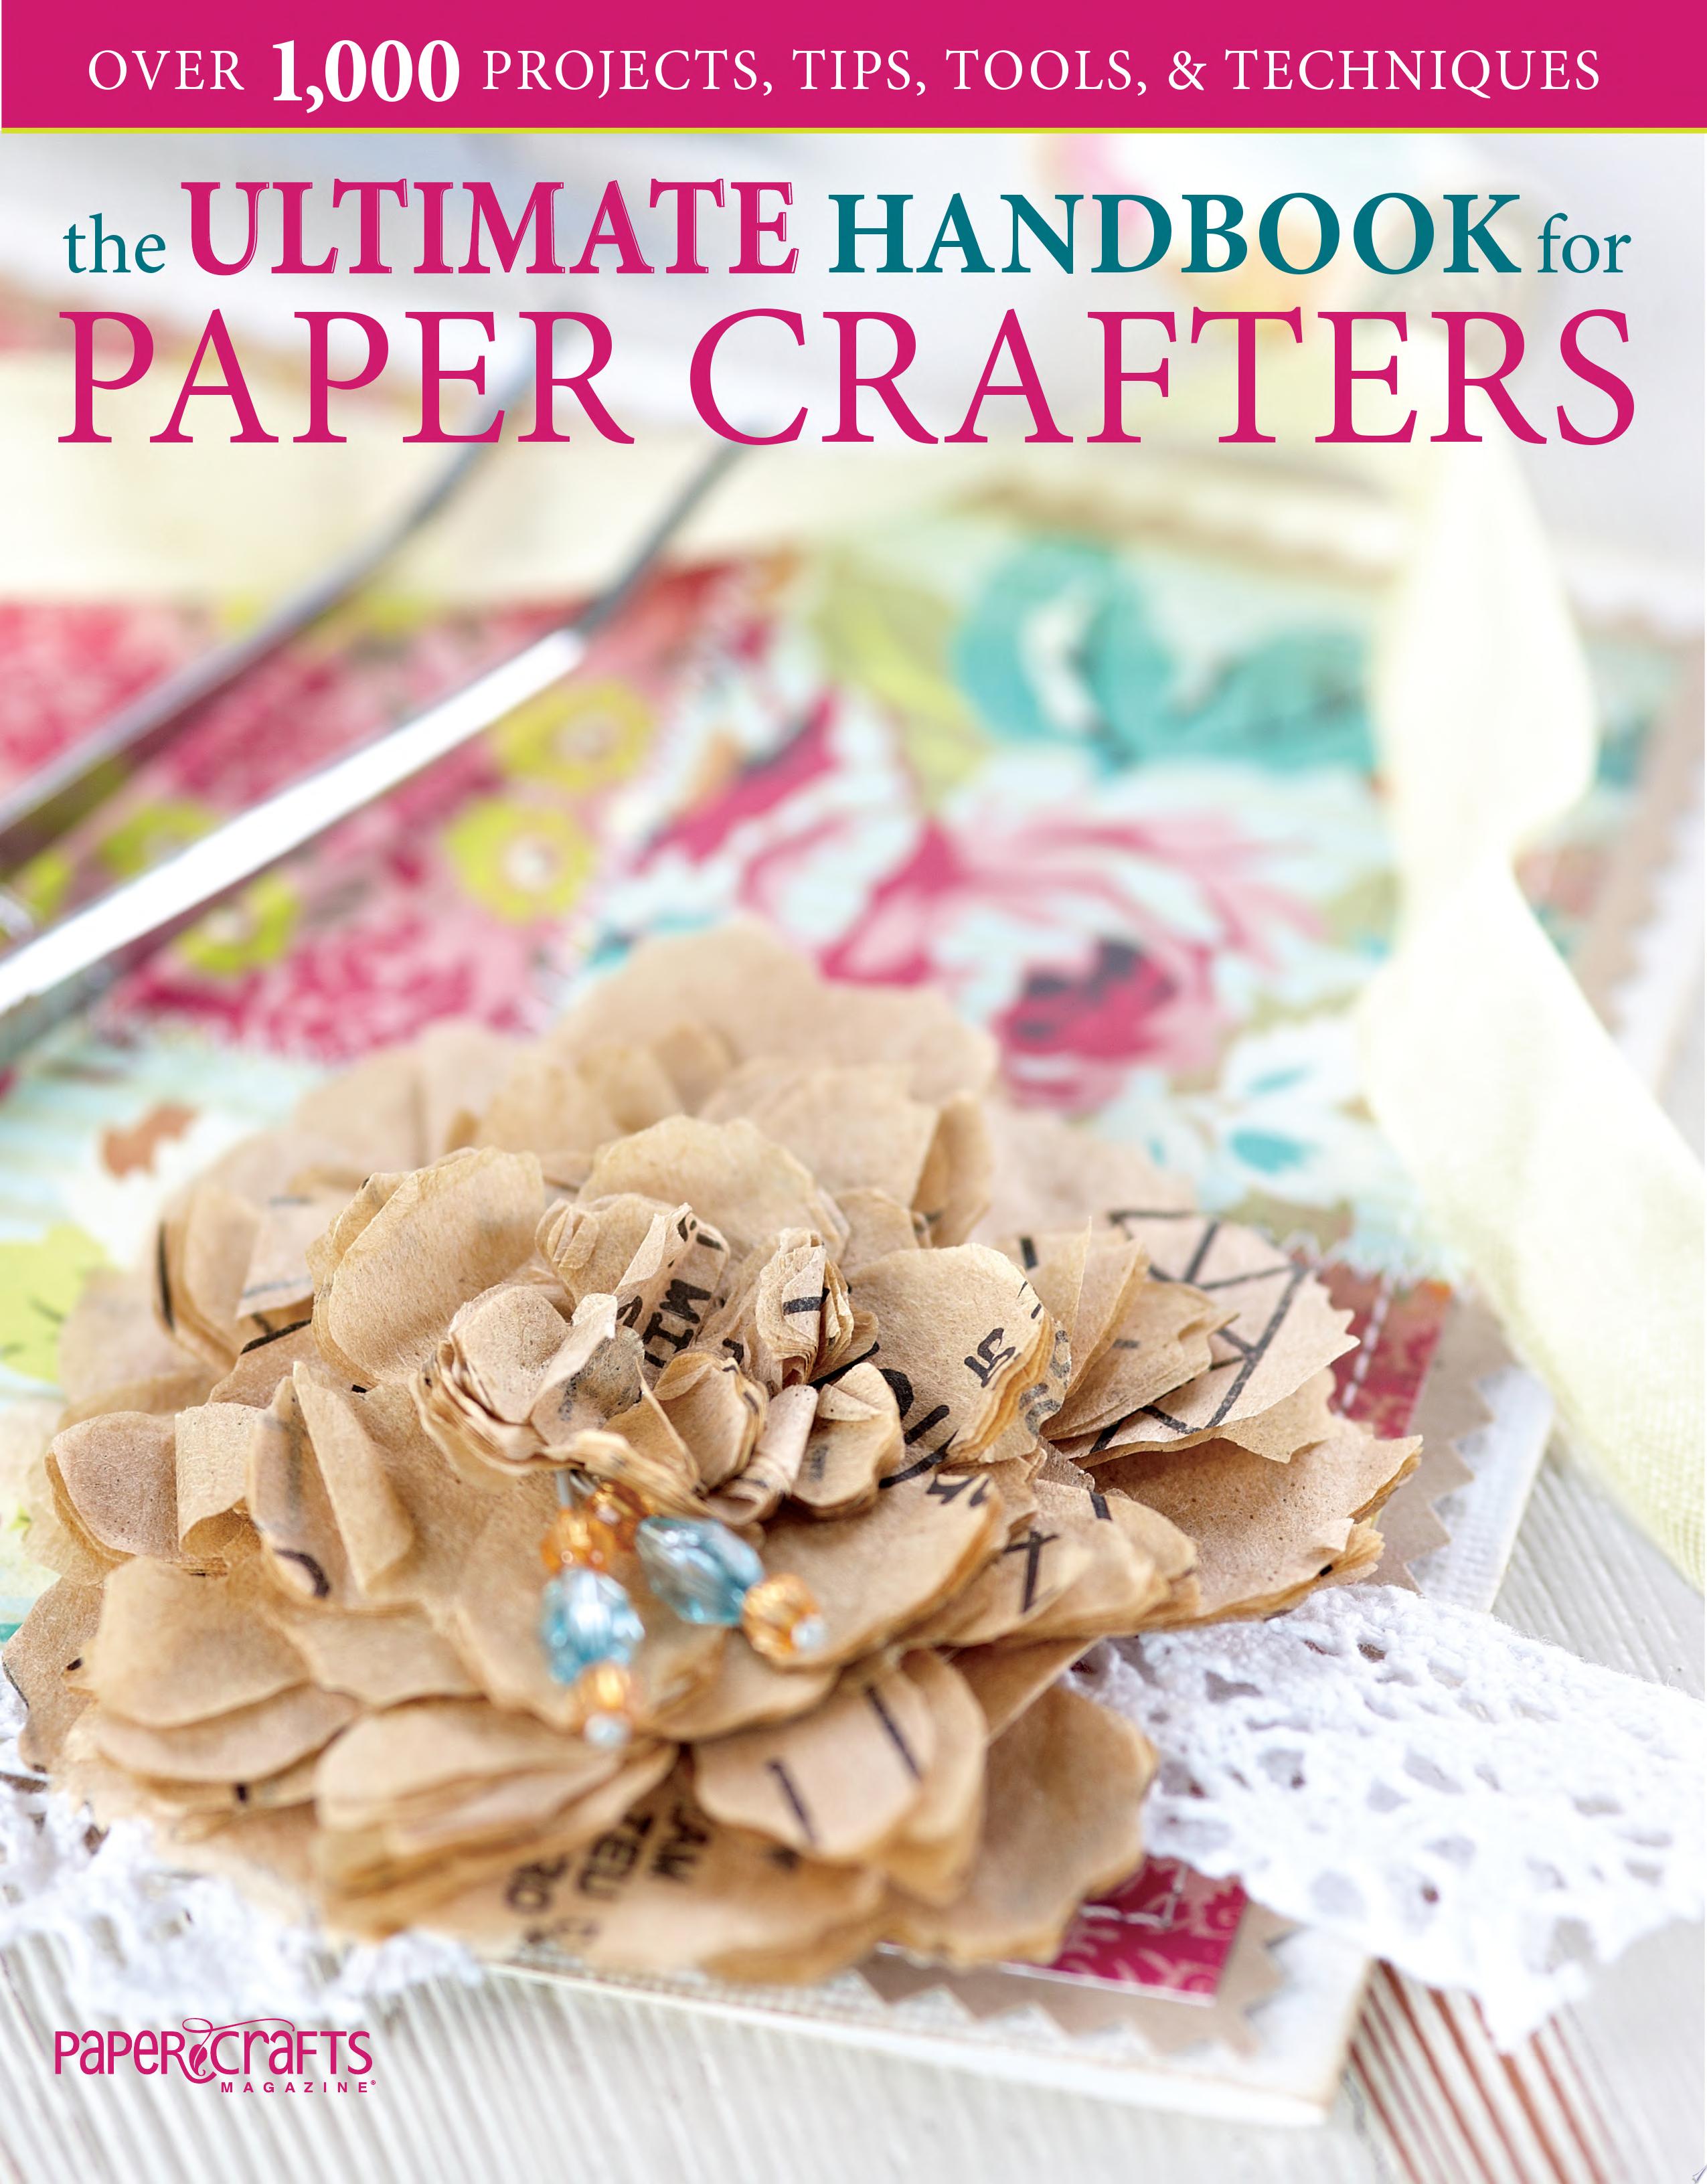 Image for "The Ultimate Handbook for Paper Crafters"